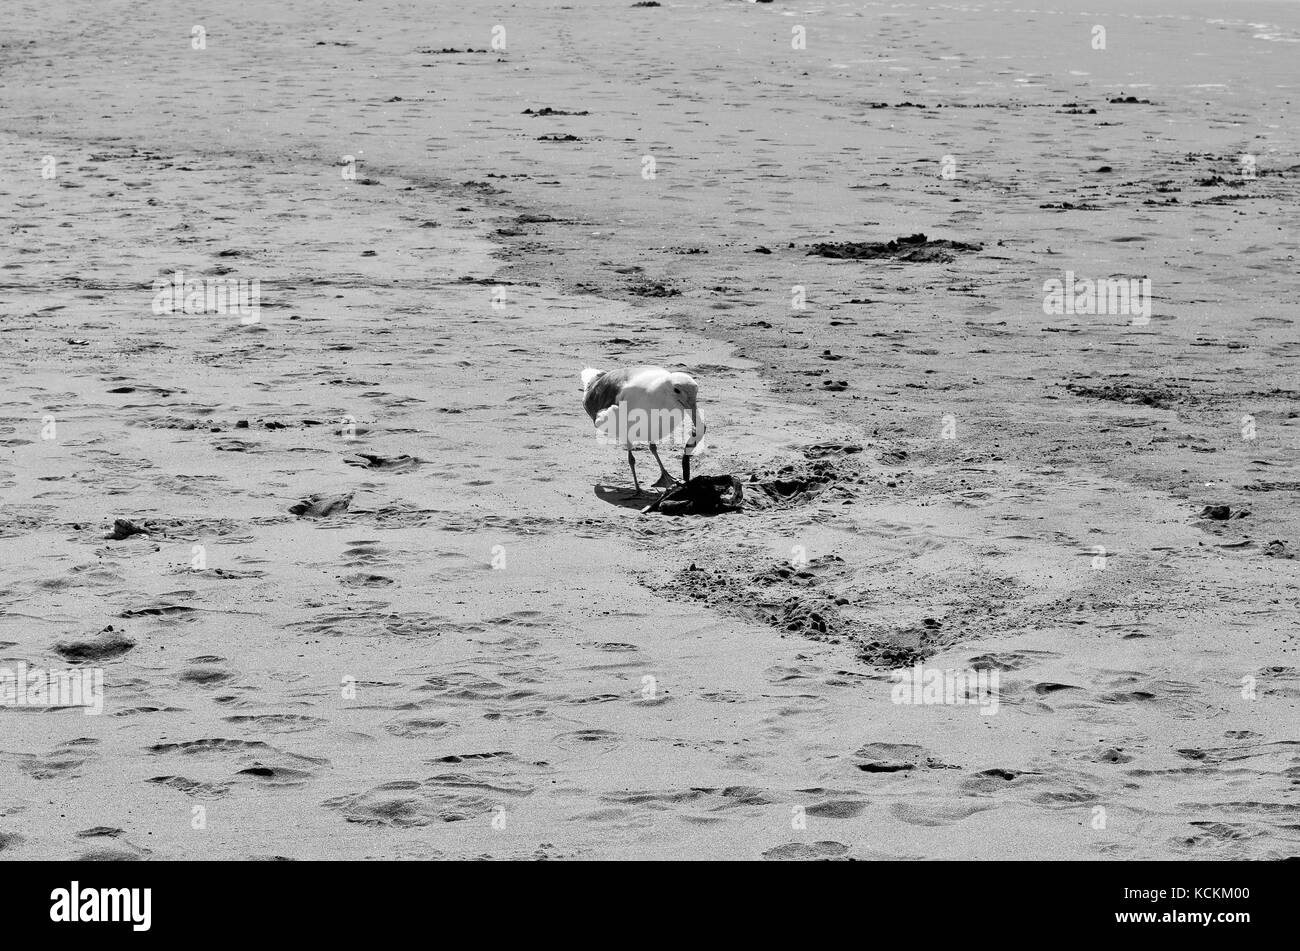 Seagull Eats Dead Crab On Beach in black and white Stock Photo